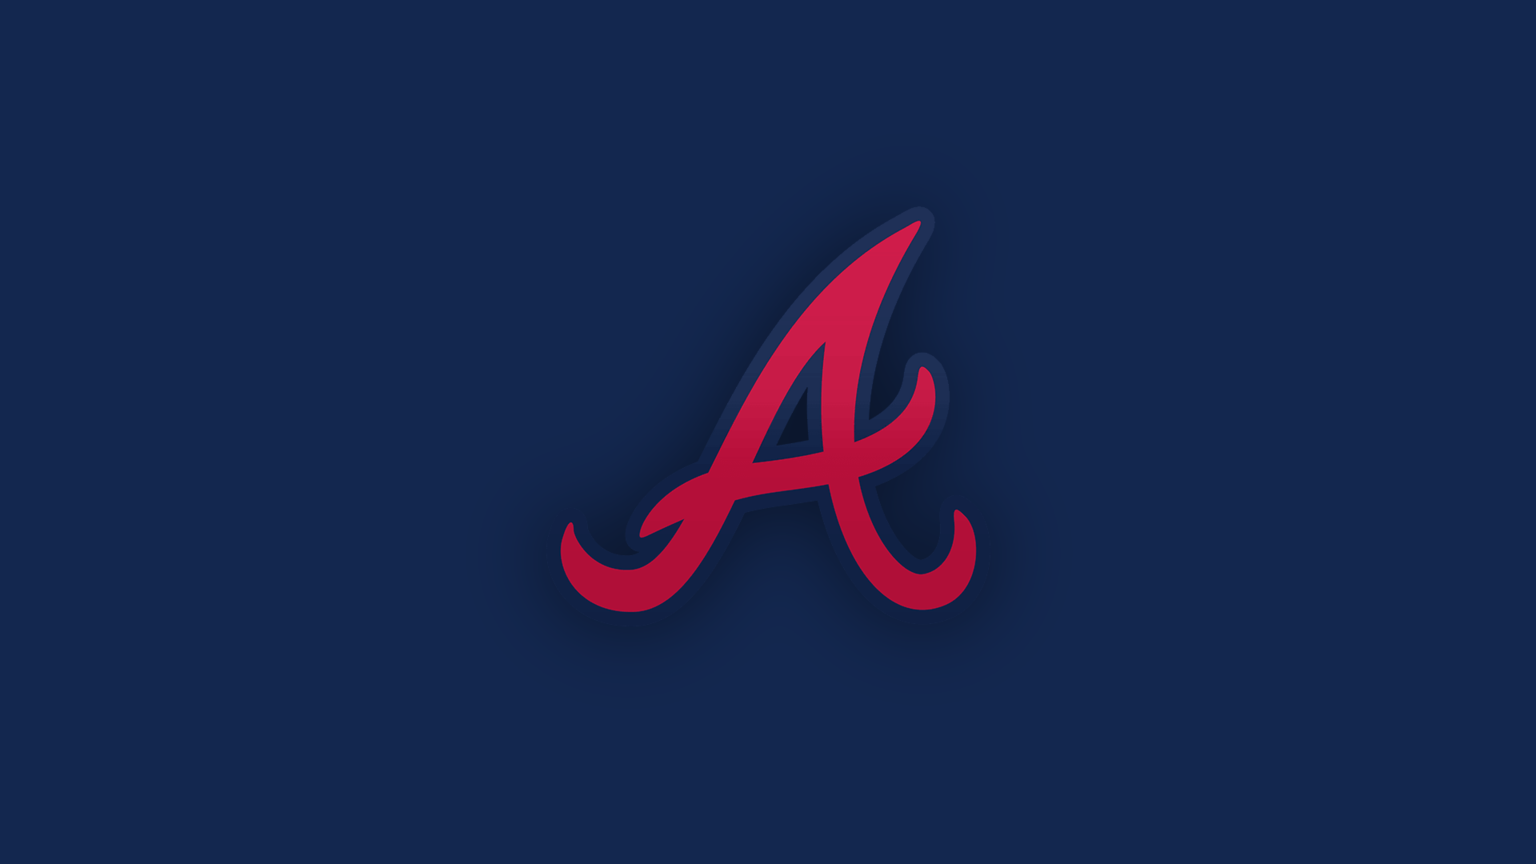 How to Watch The Atlanta Braves Live Without Cable in 2021 The Streamable